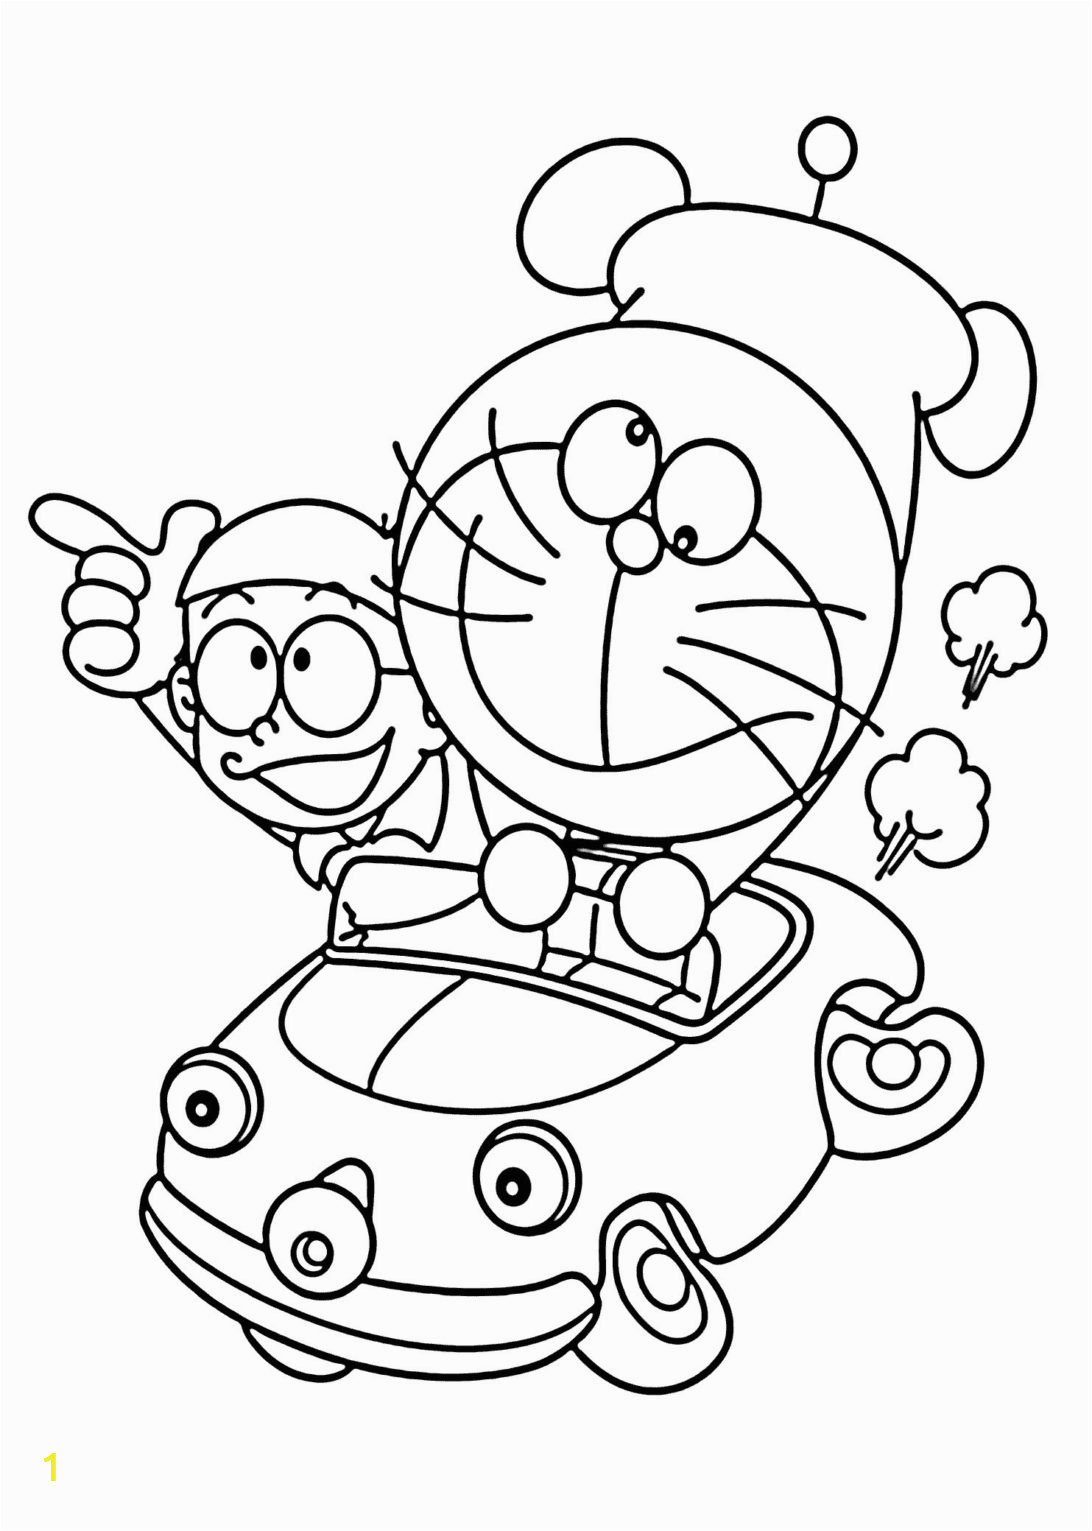 Thanksgiving Coloring Pages for Free Printable top 51 Skookum Turkey Coloring Pages Disney Mandala Free